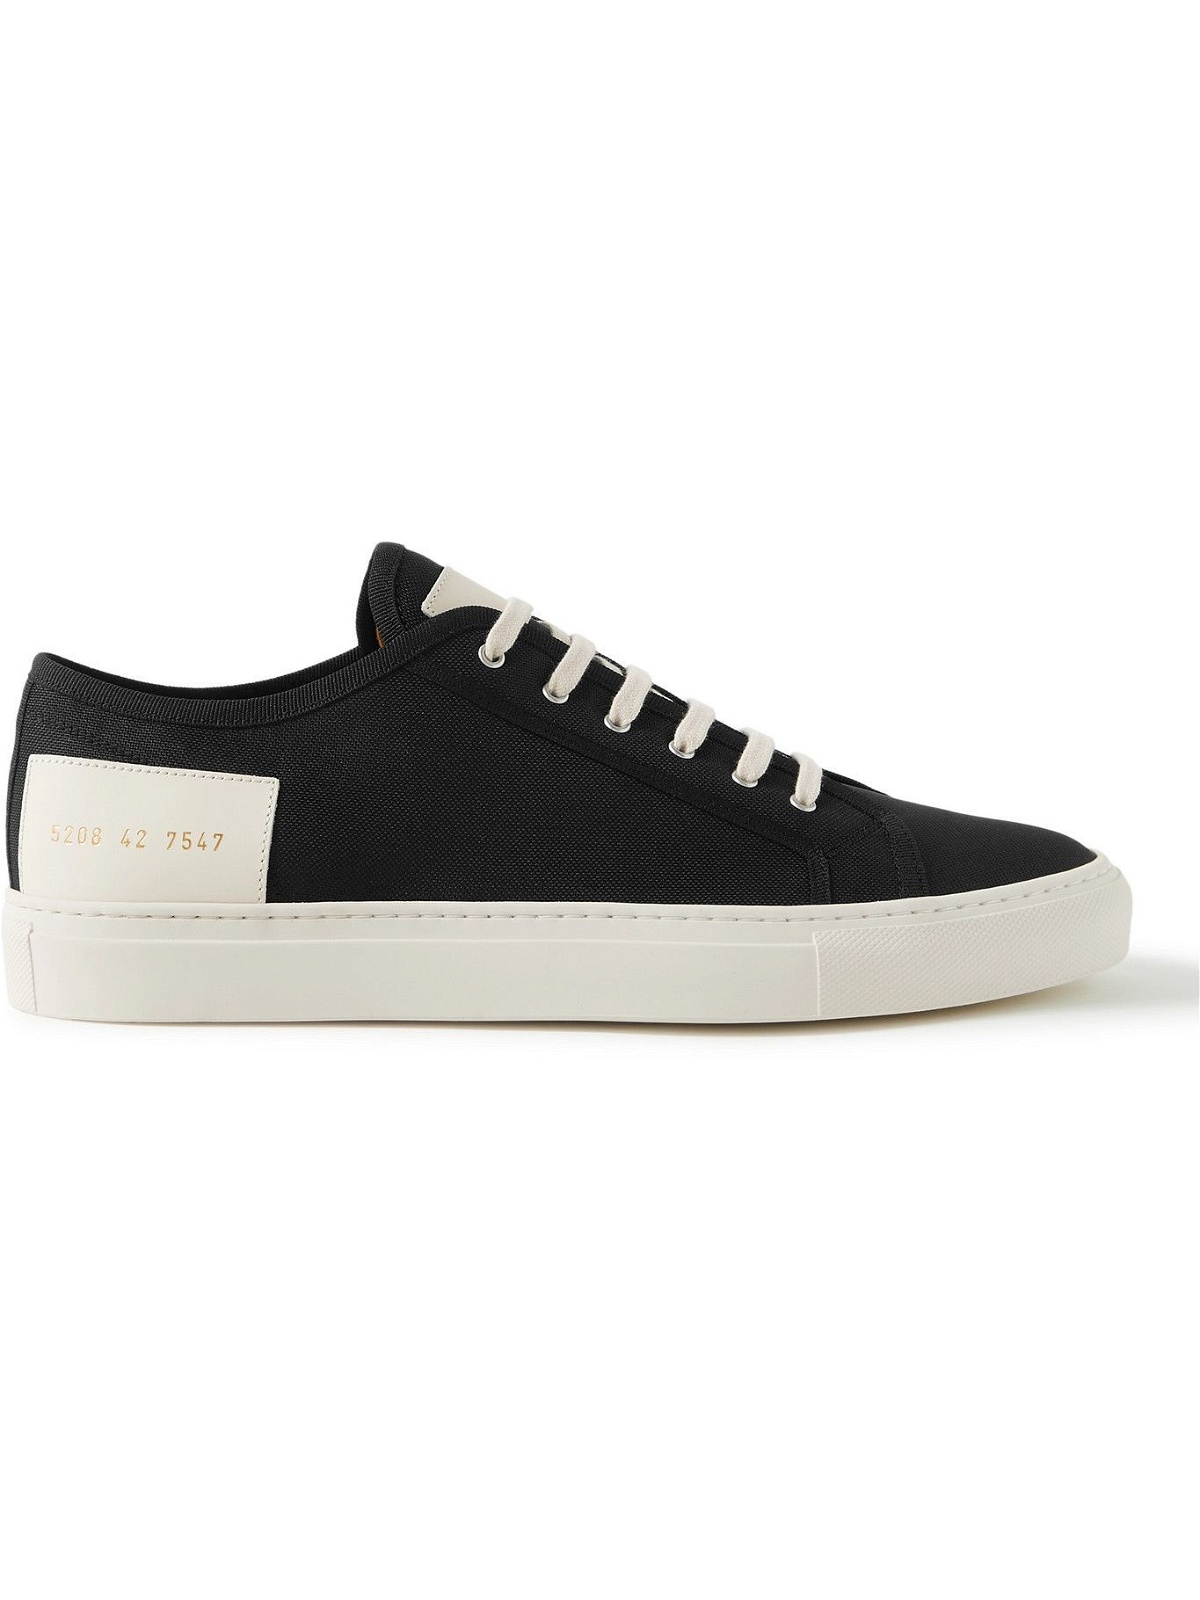 Common Projects - Tournament Low Leather-Trimmed Recycled Nylon ...